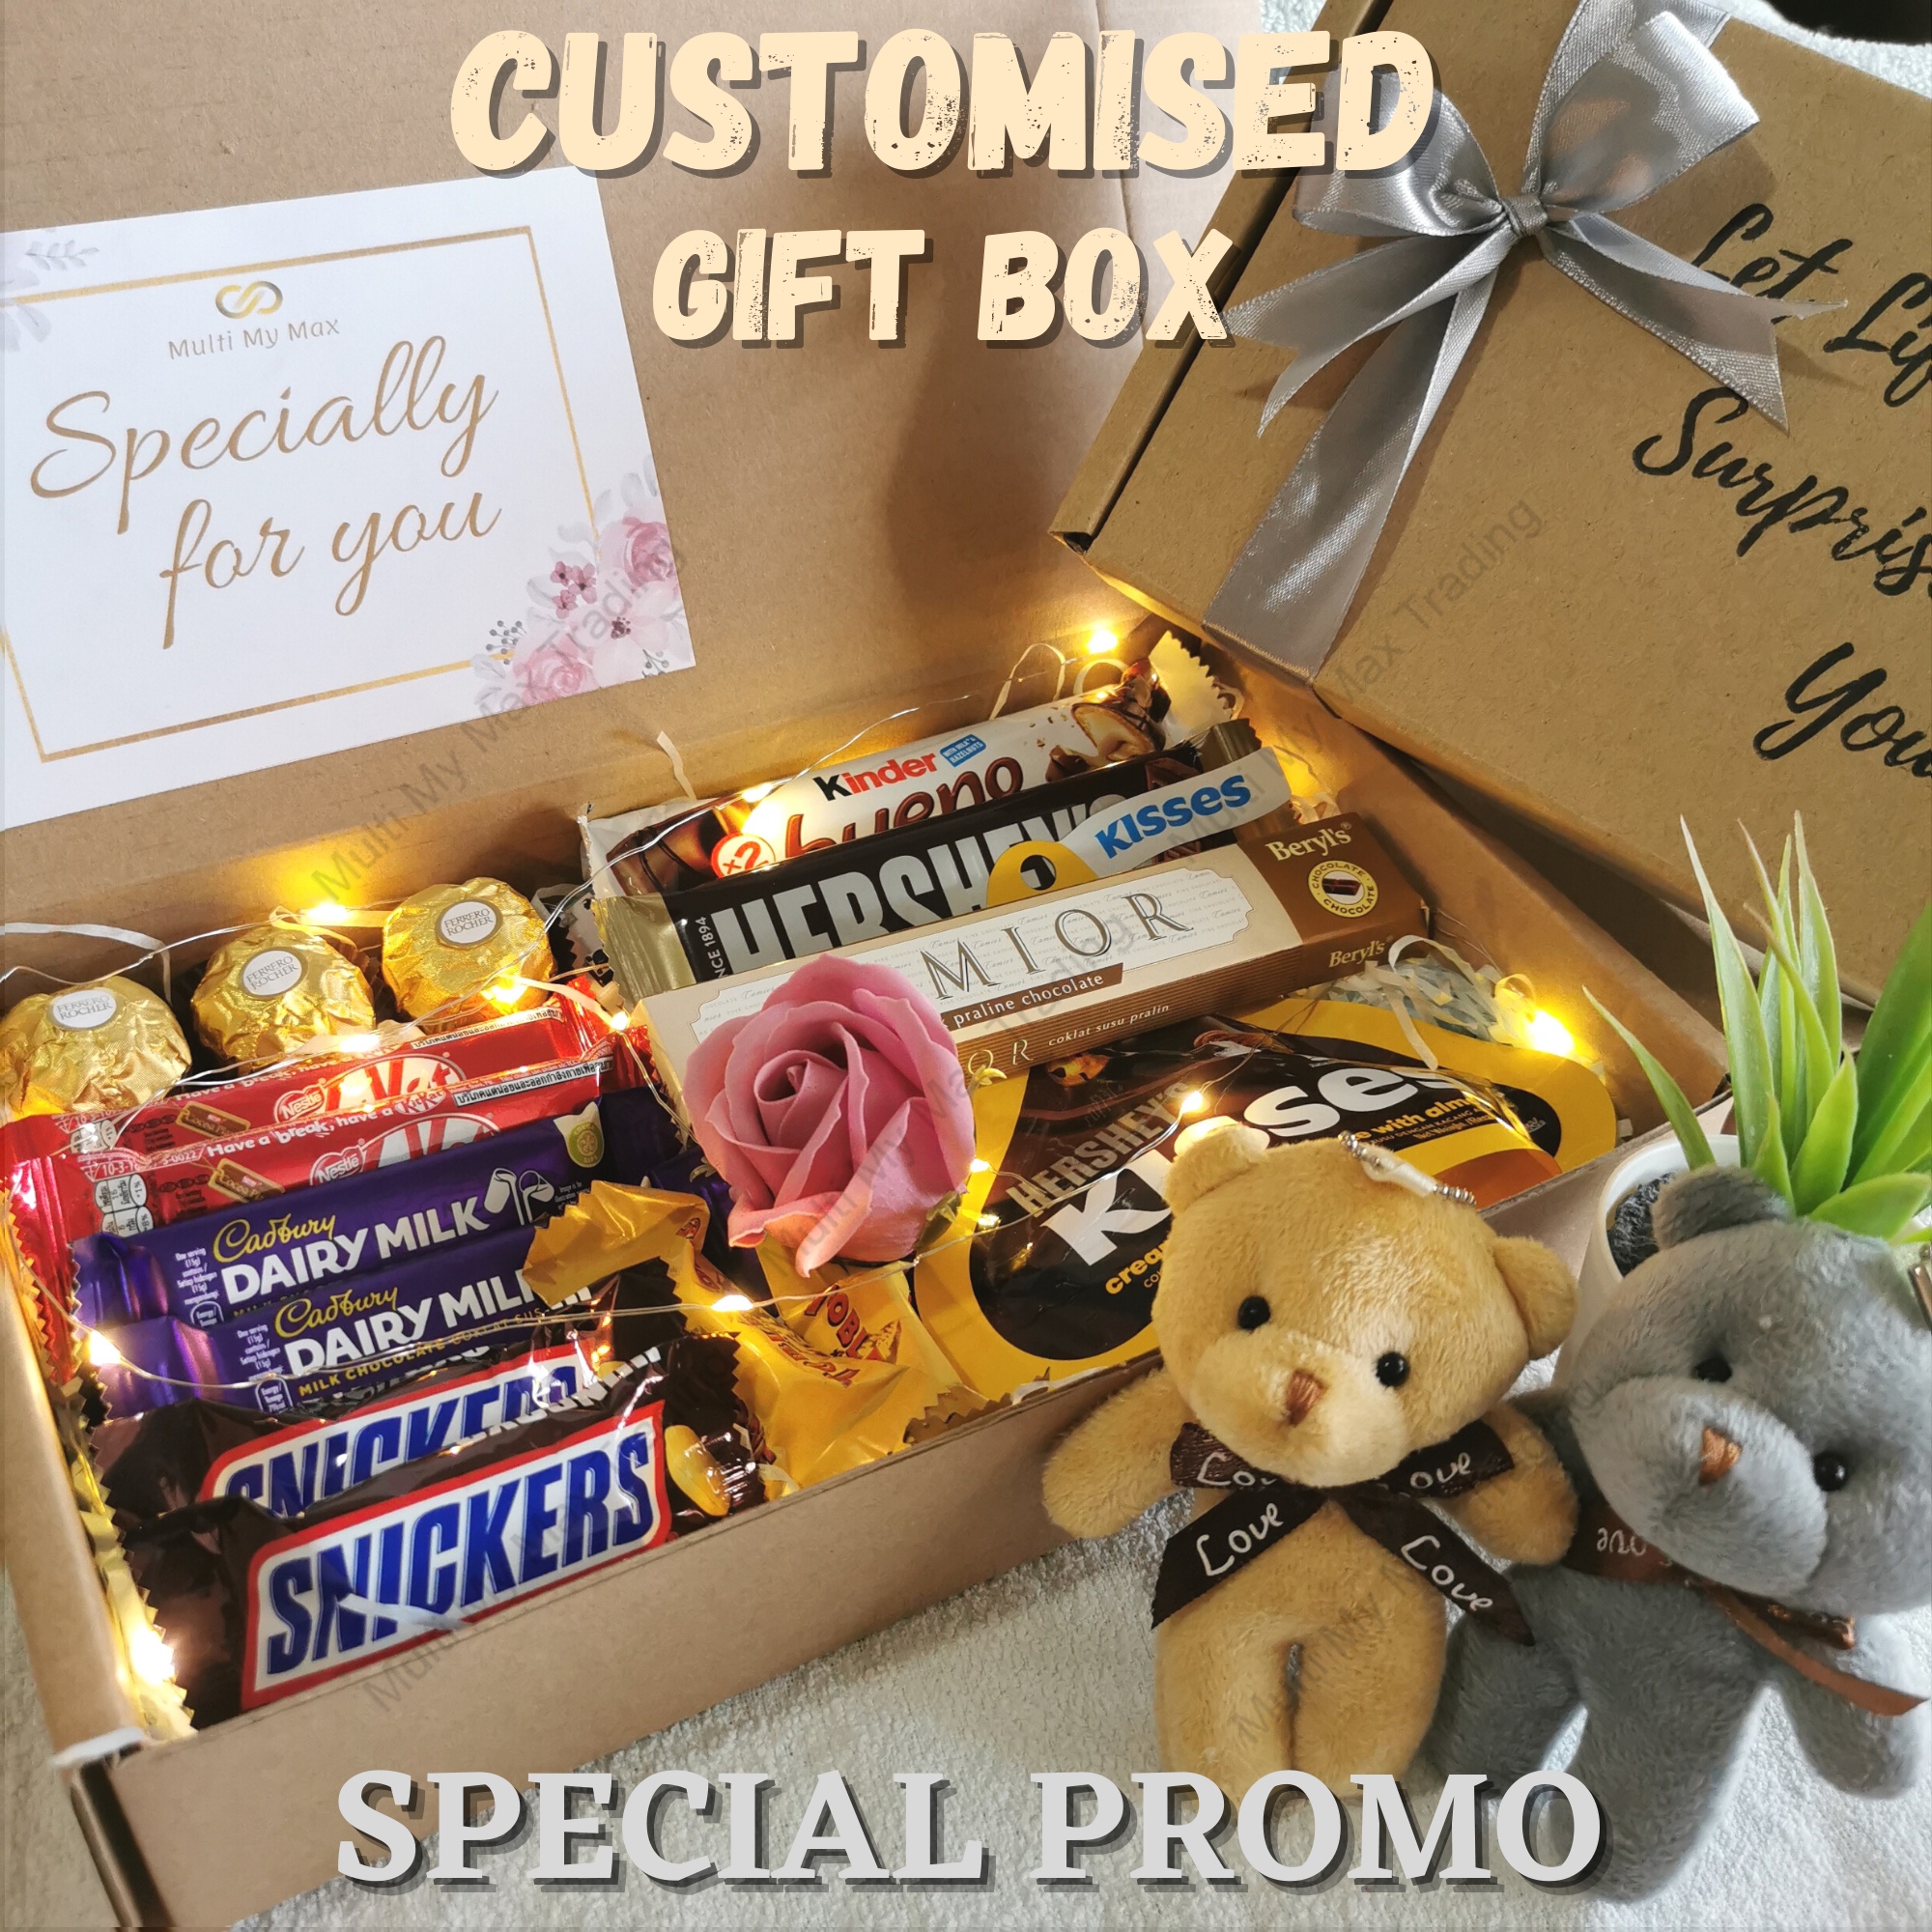 TheBlissburry.com - A Chocolate Treat! -  https://www.theblissburry.com/product/christmas-gift-pack-058/ Check the  below link in blue for more chocolate gifts with prices 👇  https://www.theblissburry.com/product-category/other-gifts/chocolate-gifts  ...